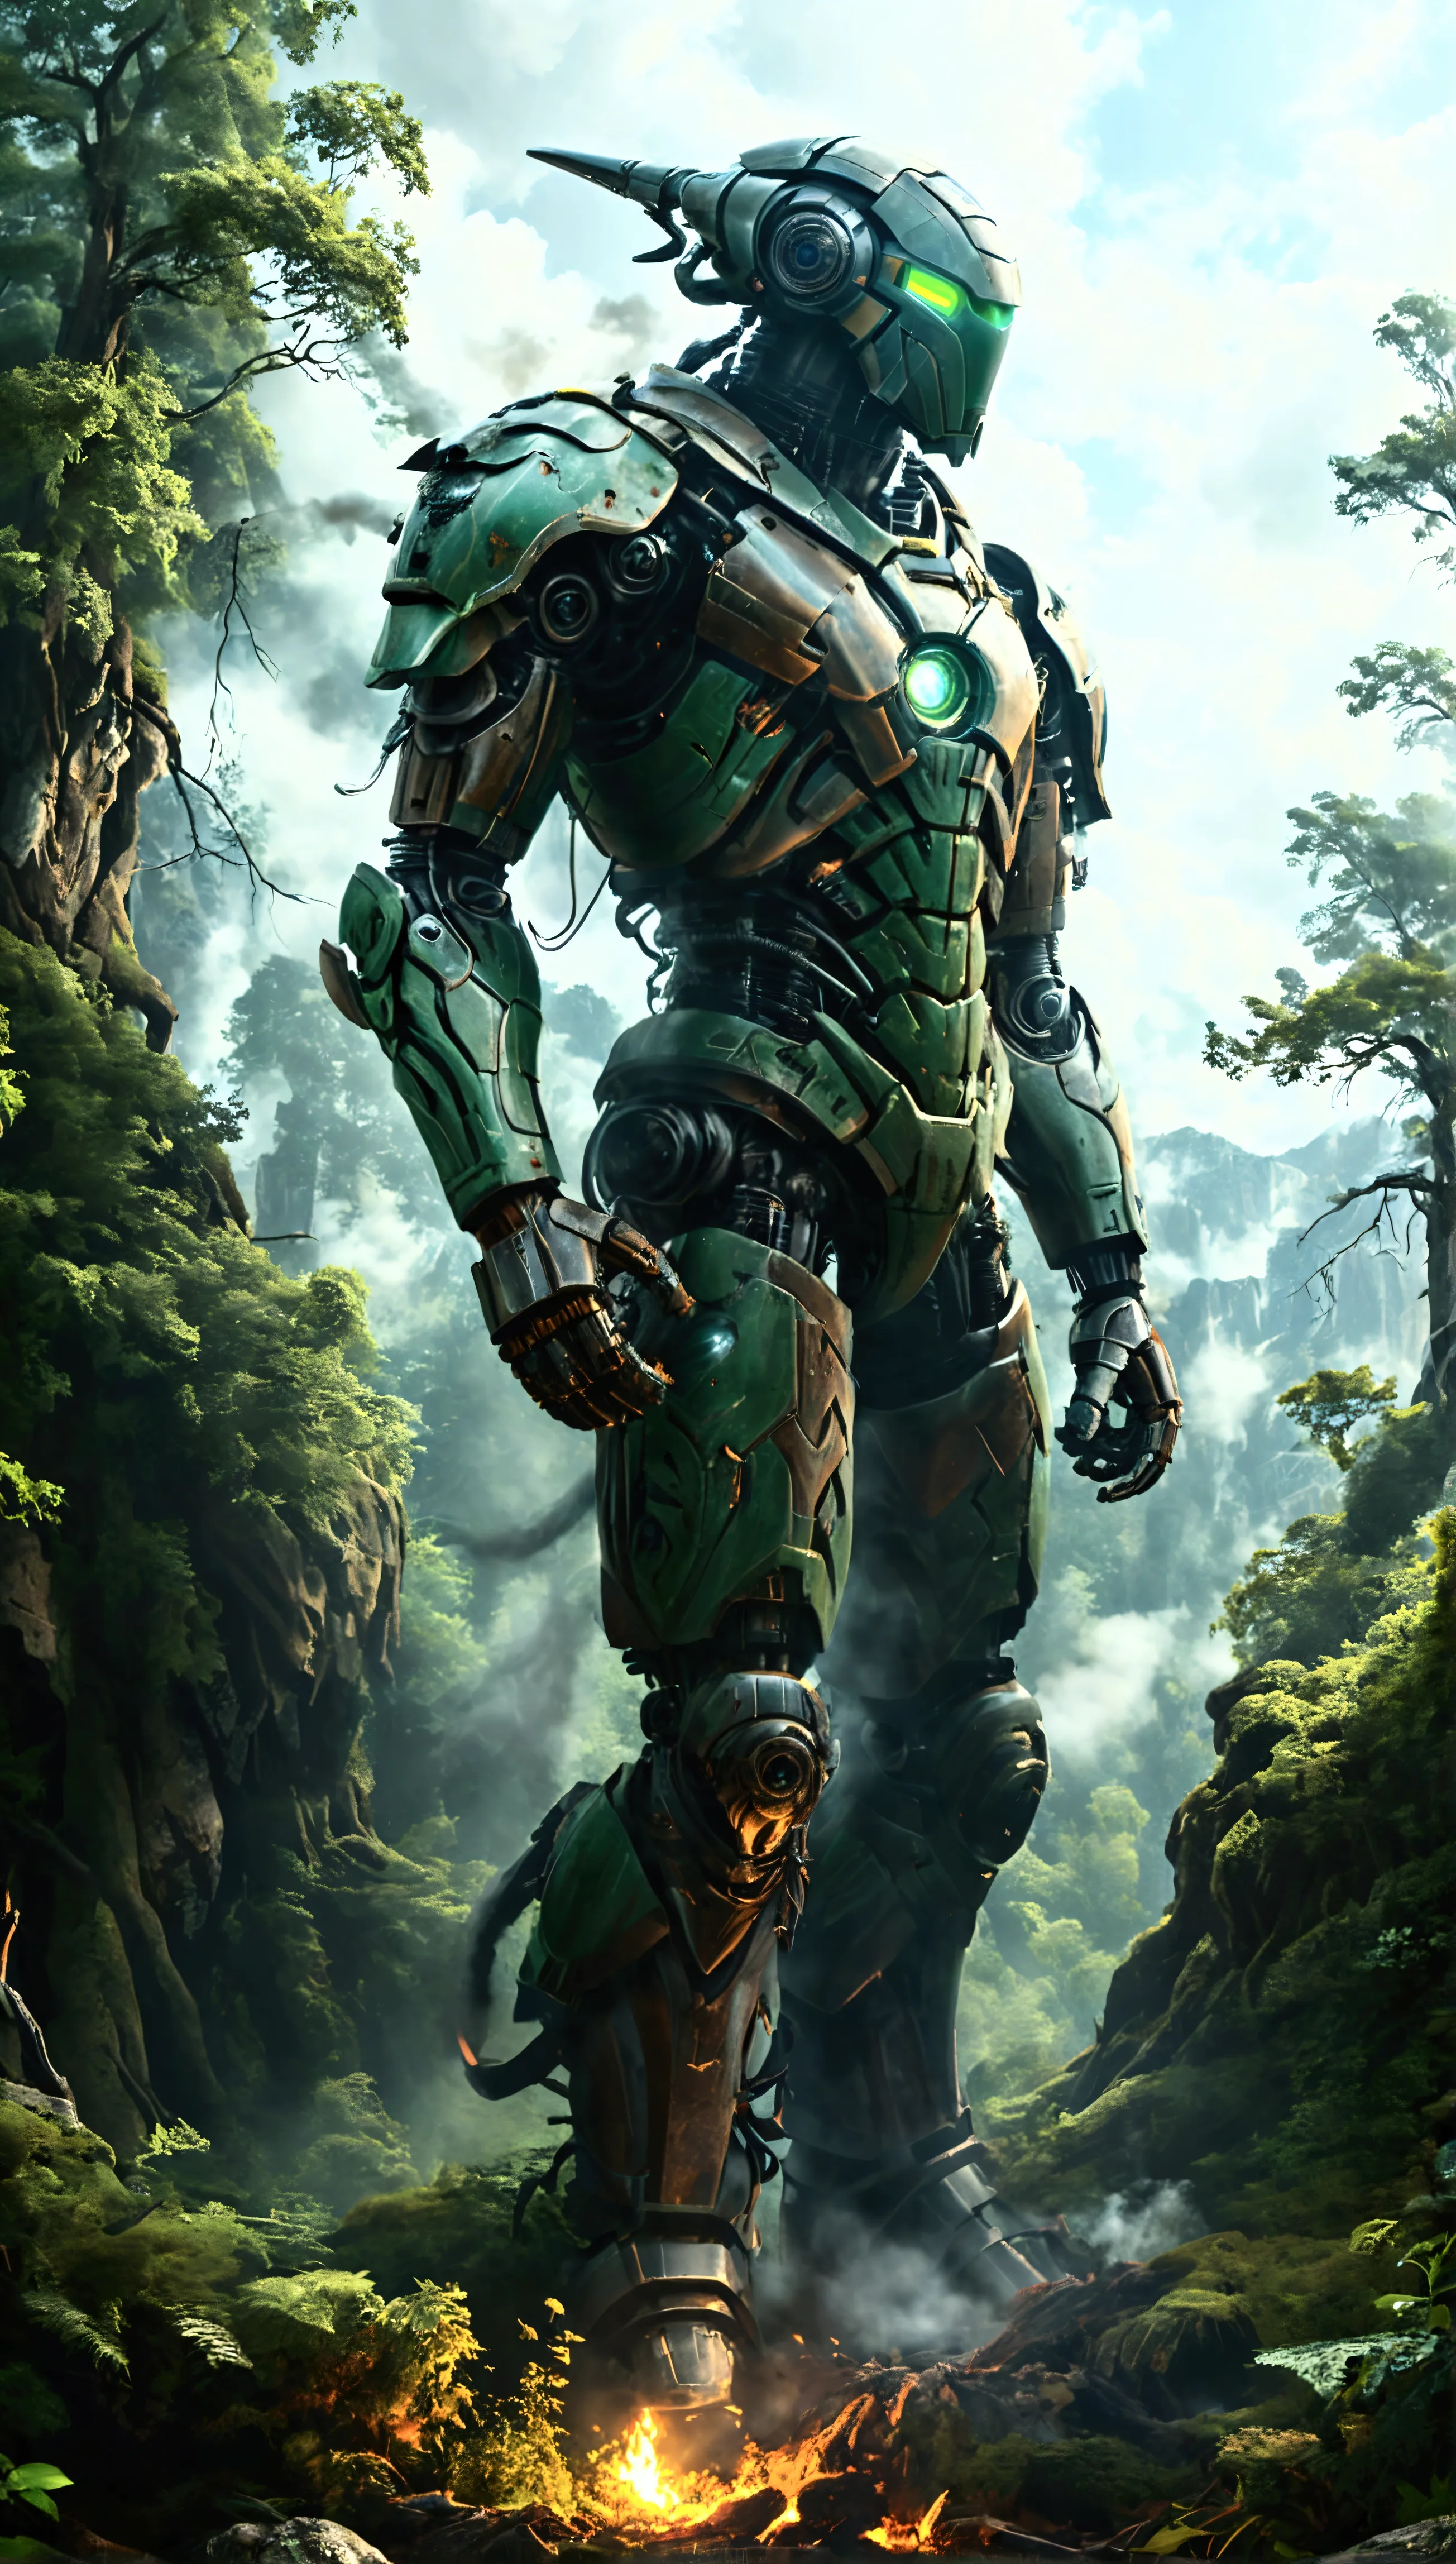 Create a digital art piece featuring a Forest humaniod Guardian Jaeger standing imposingly at the edge of a vast forest, towerin...